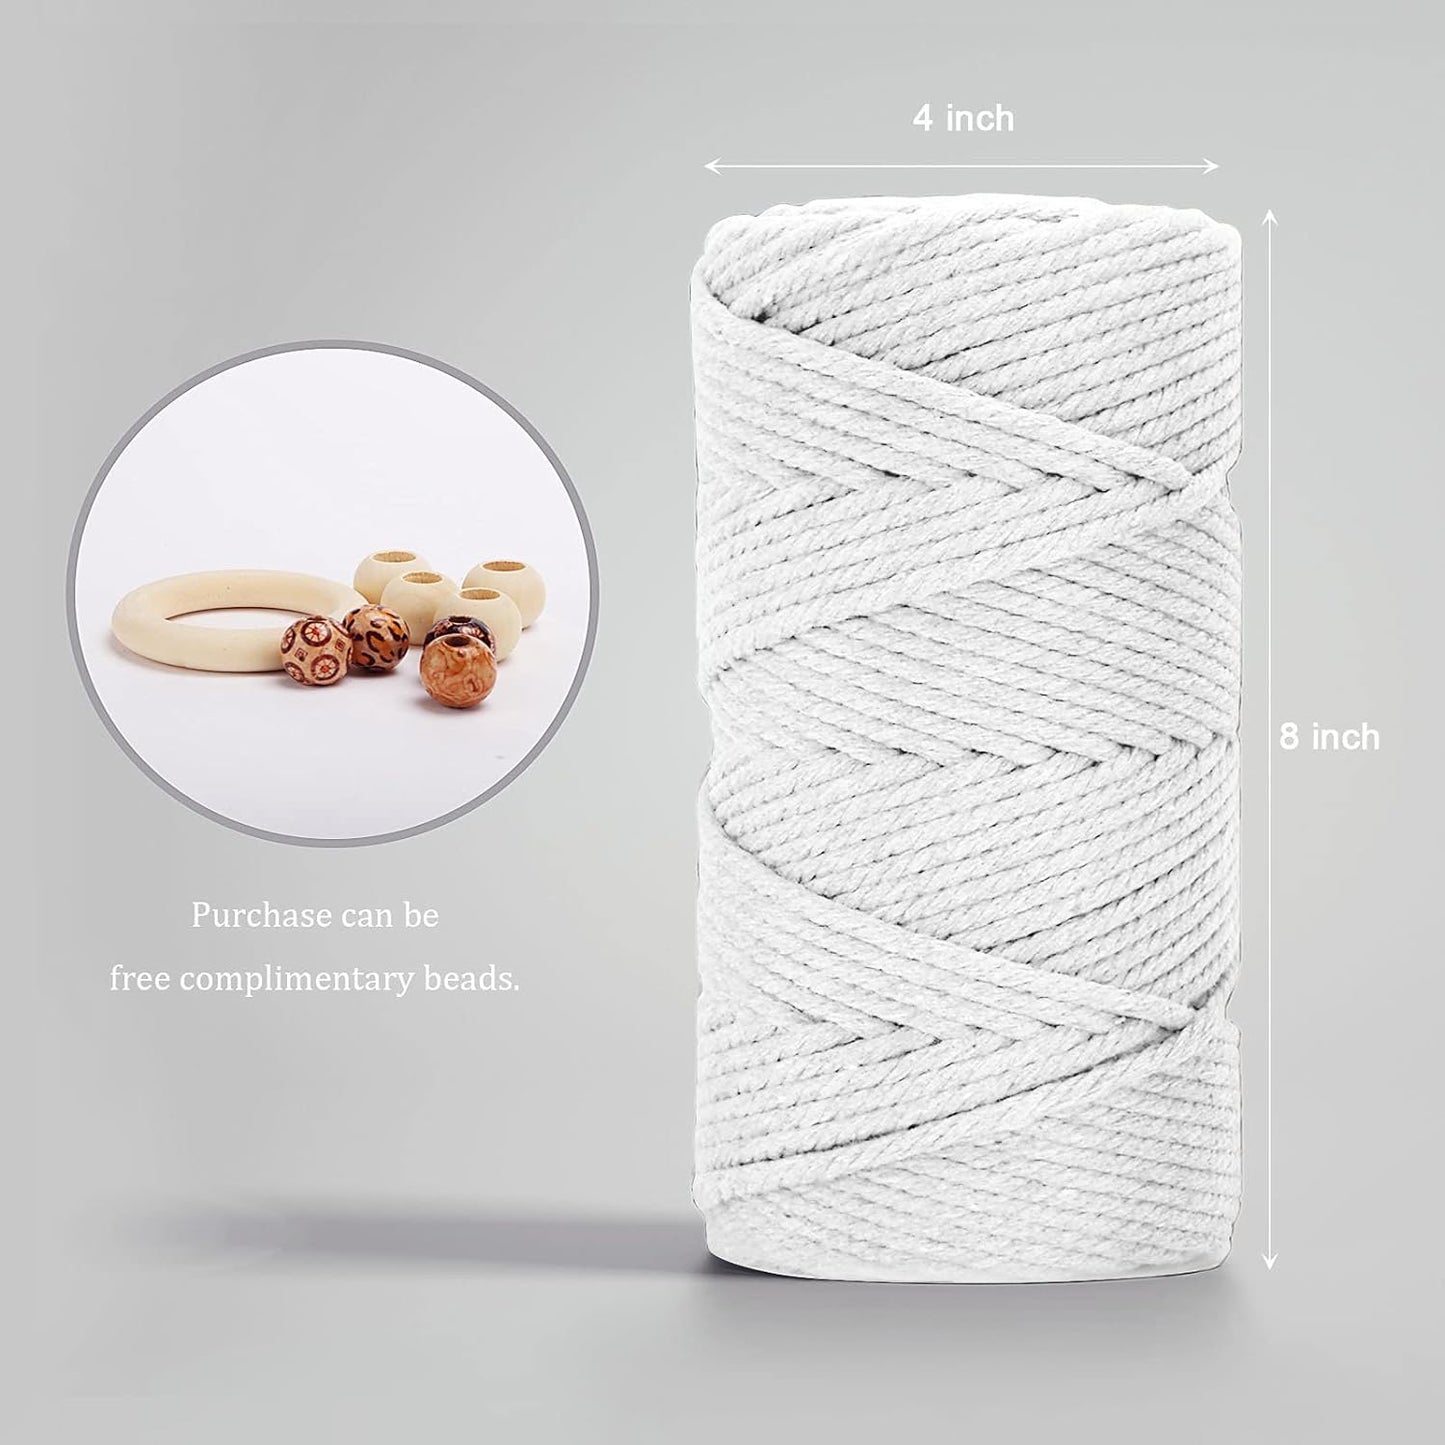 Macrame Cotton Cord 5Mm X 109 Yards,  100% Natural Handmade Colorful 4 Strands Twisted Braided Cotton Rope for Wall Hanging Plant Hangers Gift Wrapping Tapestry DIY Crafts(100M,White)